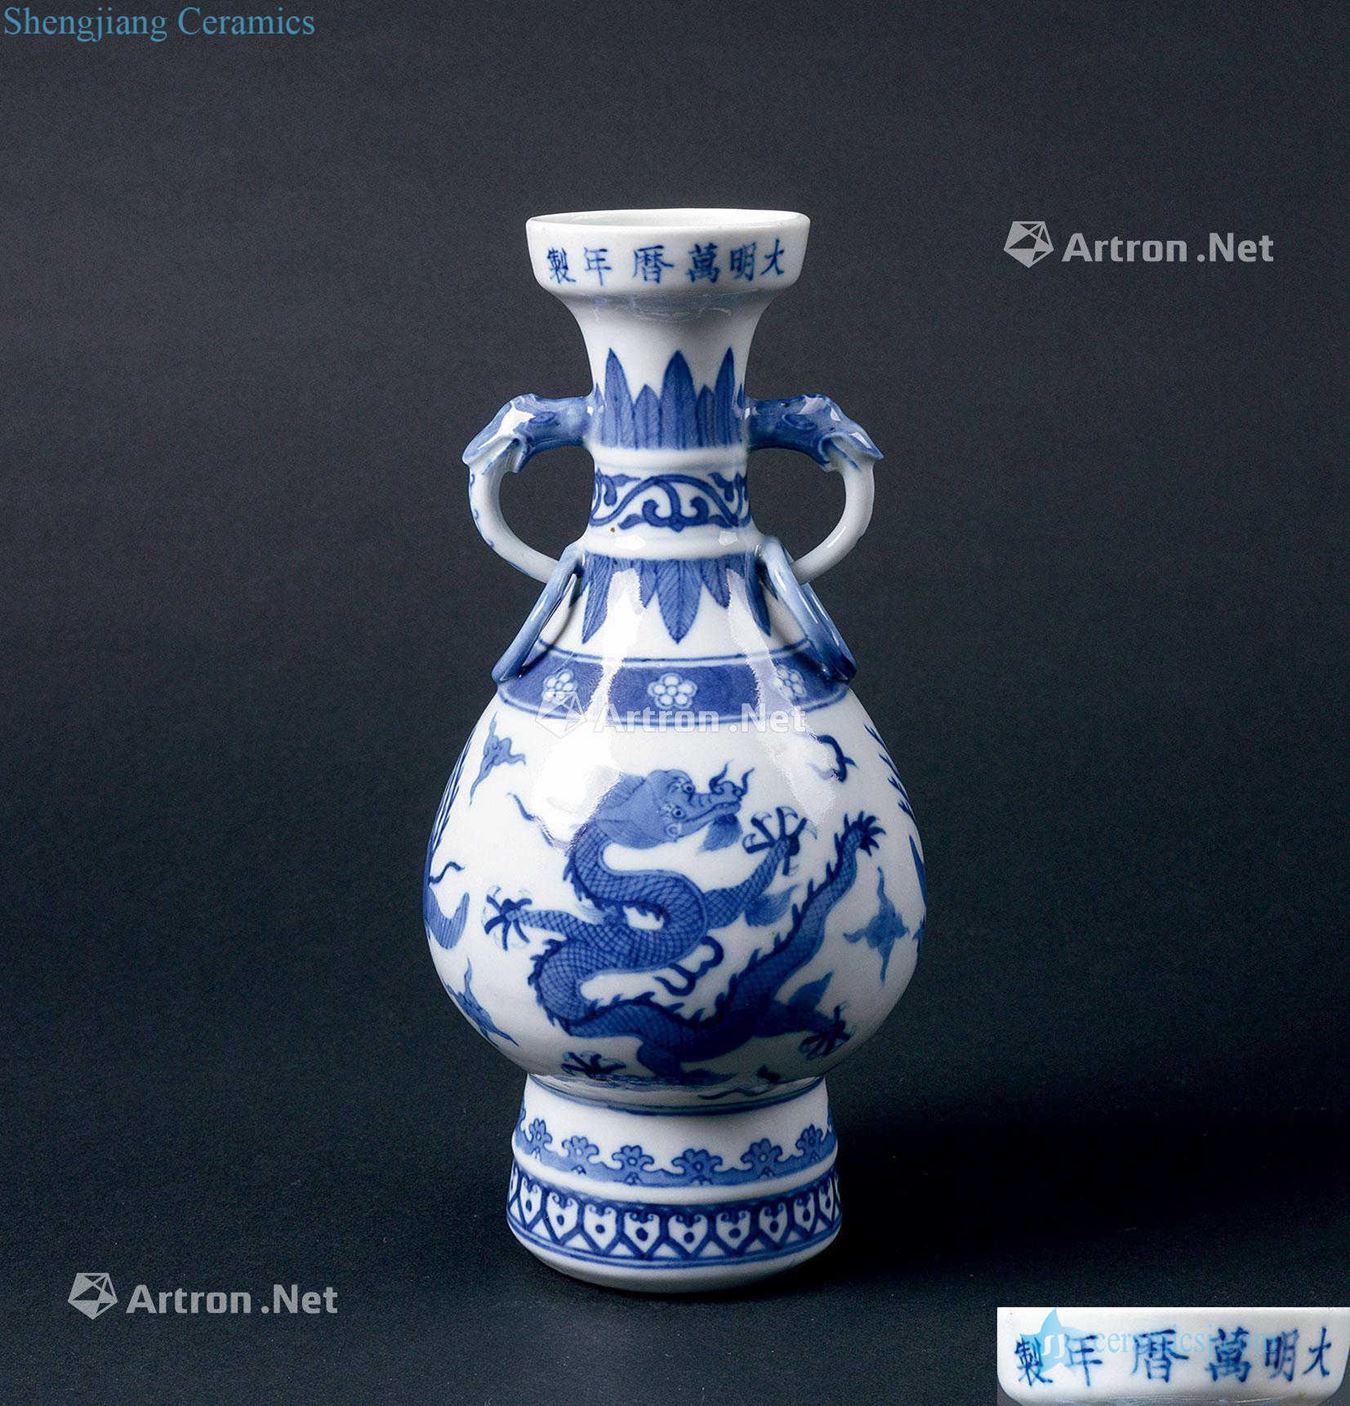 In the qing dynasty (1644-1911) blue and white in extremely good fortune grain vase with a double door knocker